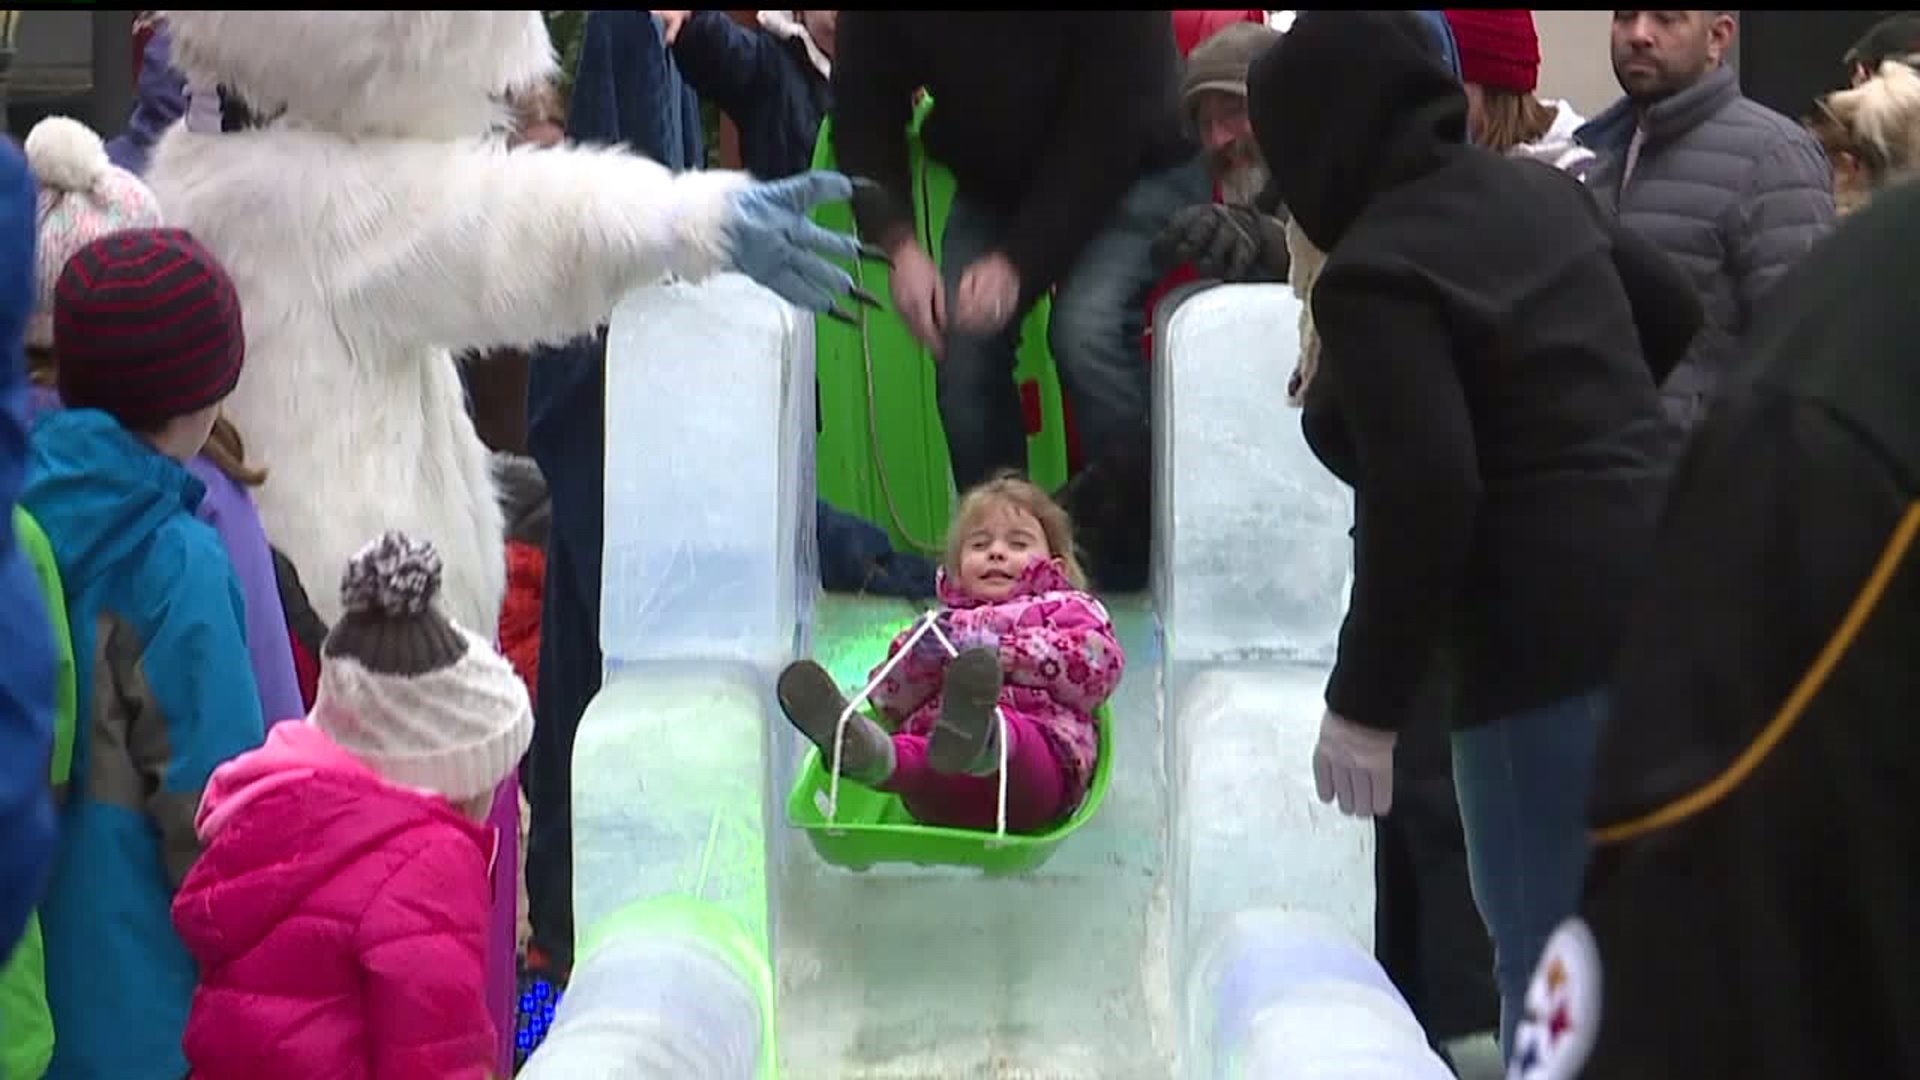 FestivIce brings 20,000 pounds of ice to display in downtown York